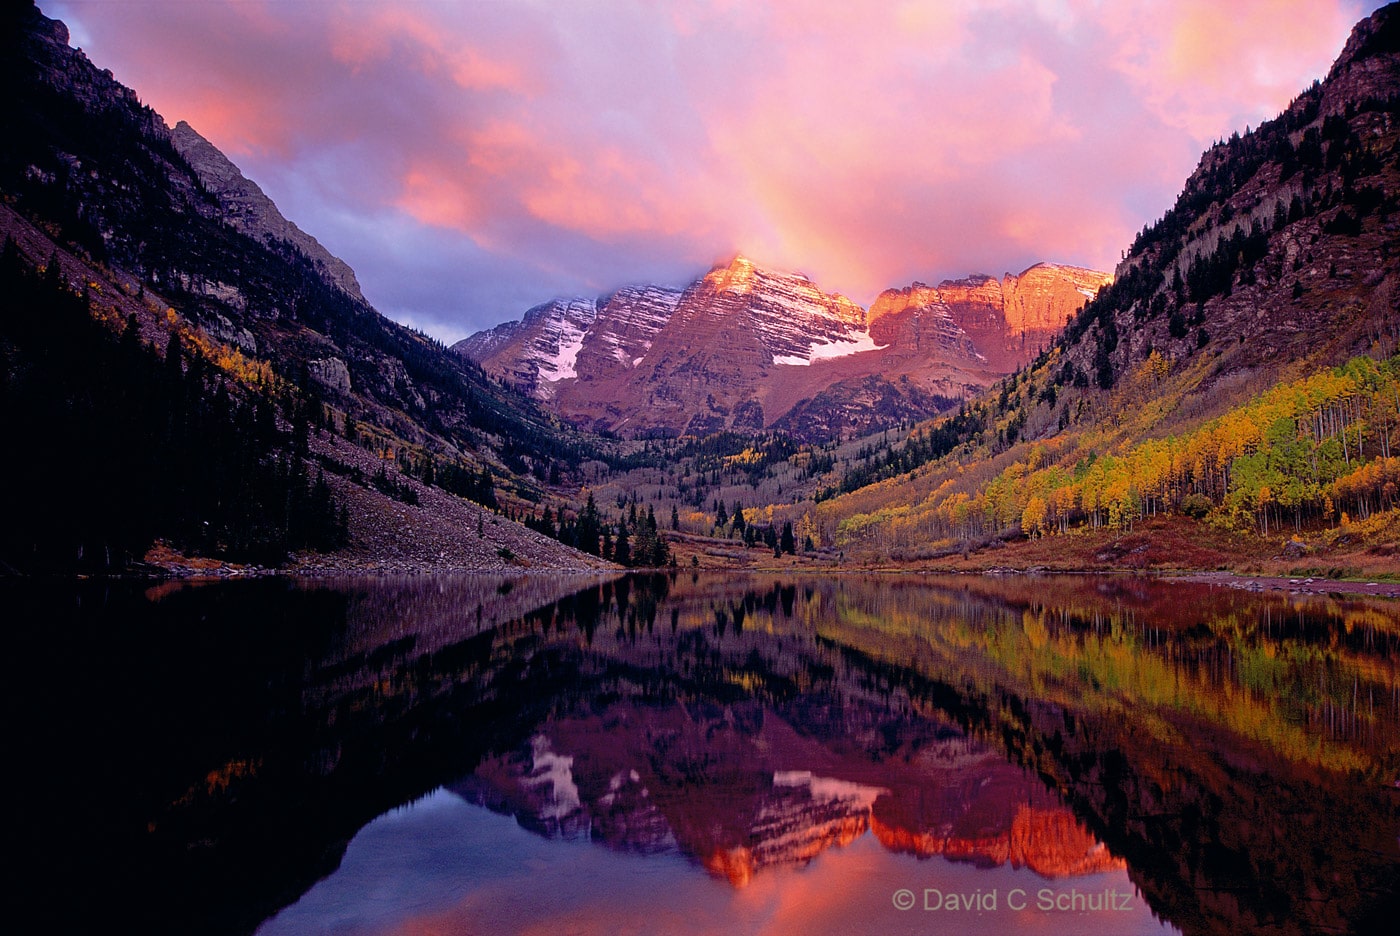 The Maroon Bells, CO - Image #68-3398